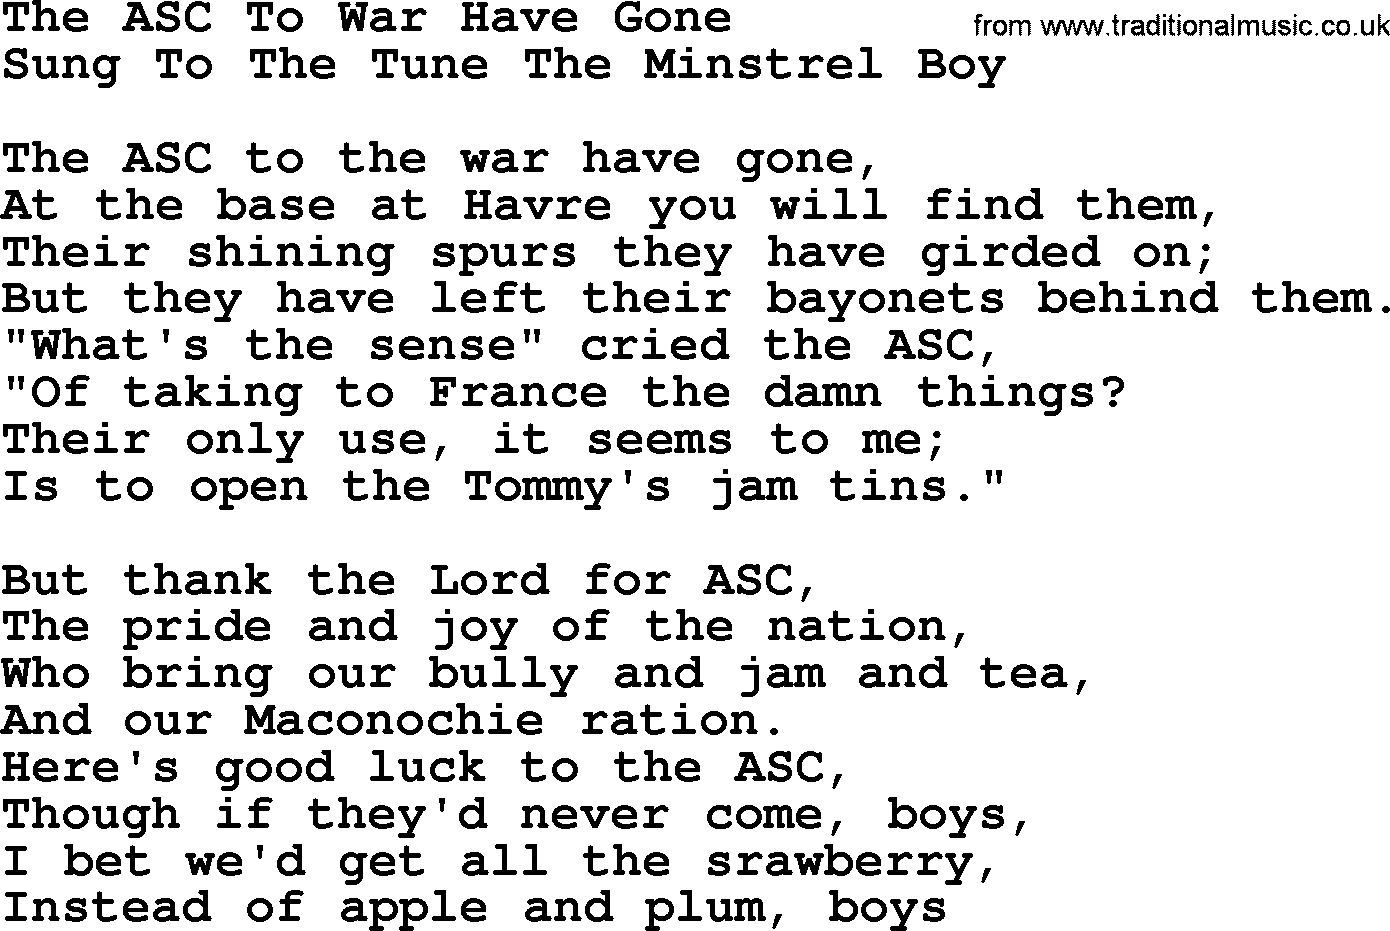 World War(WW1) One Song: The Asc To War Have Gone, lyrics and PDF